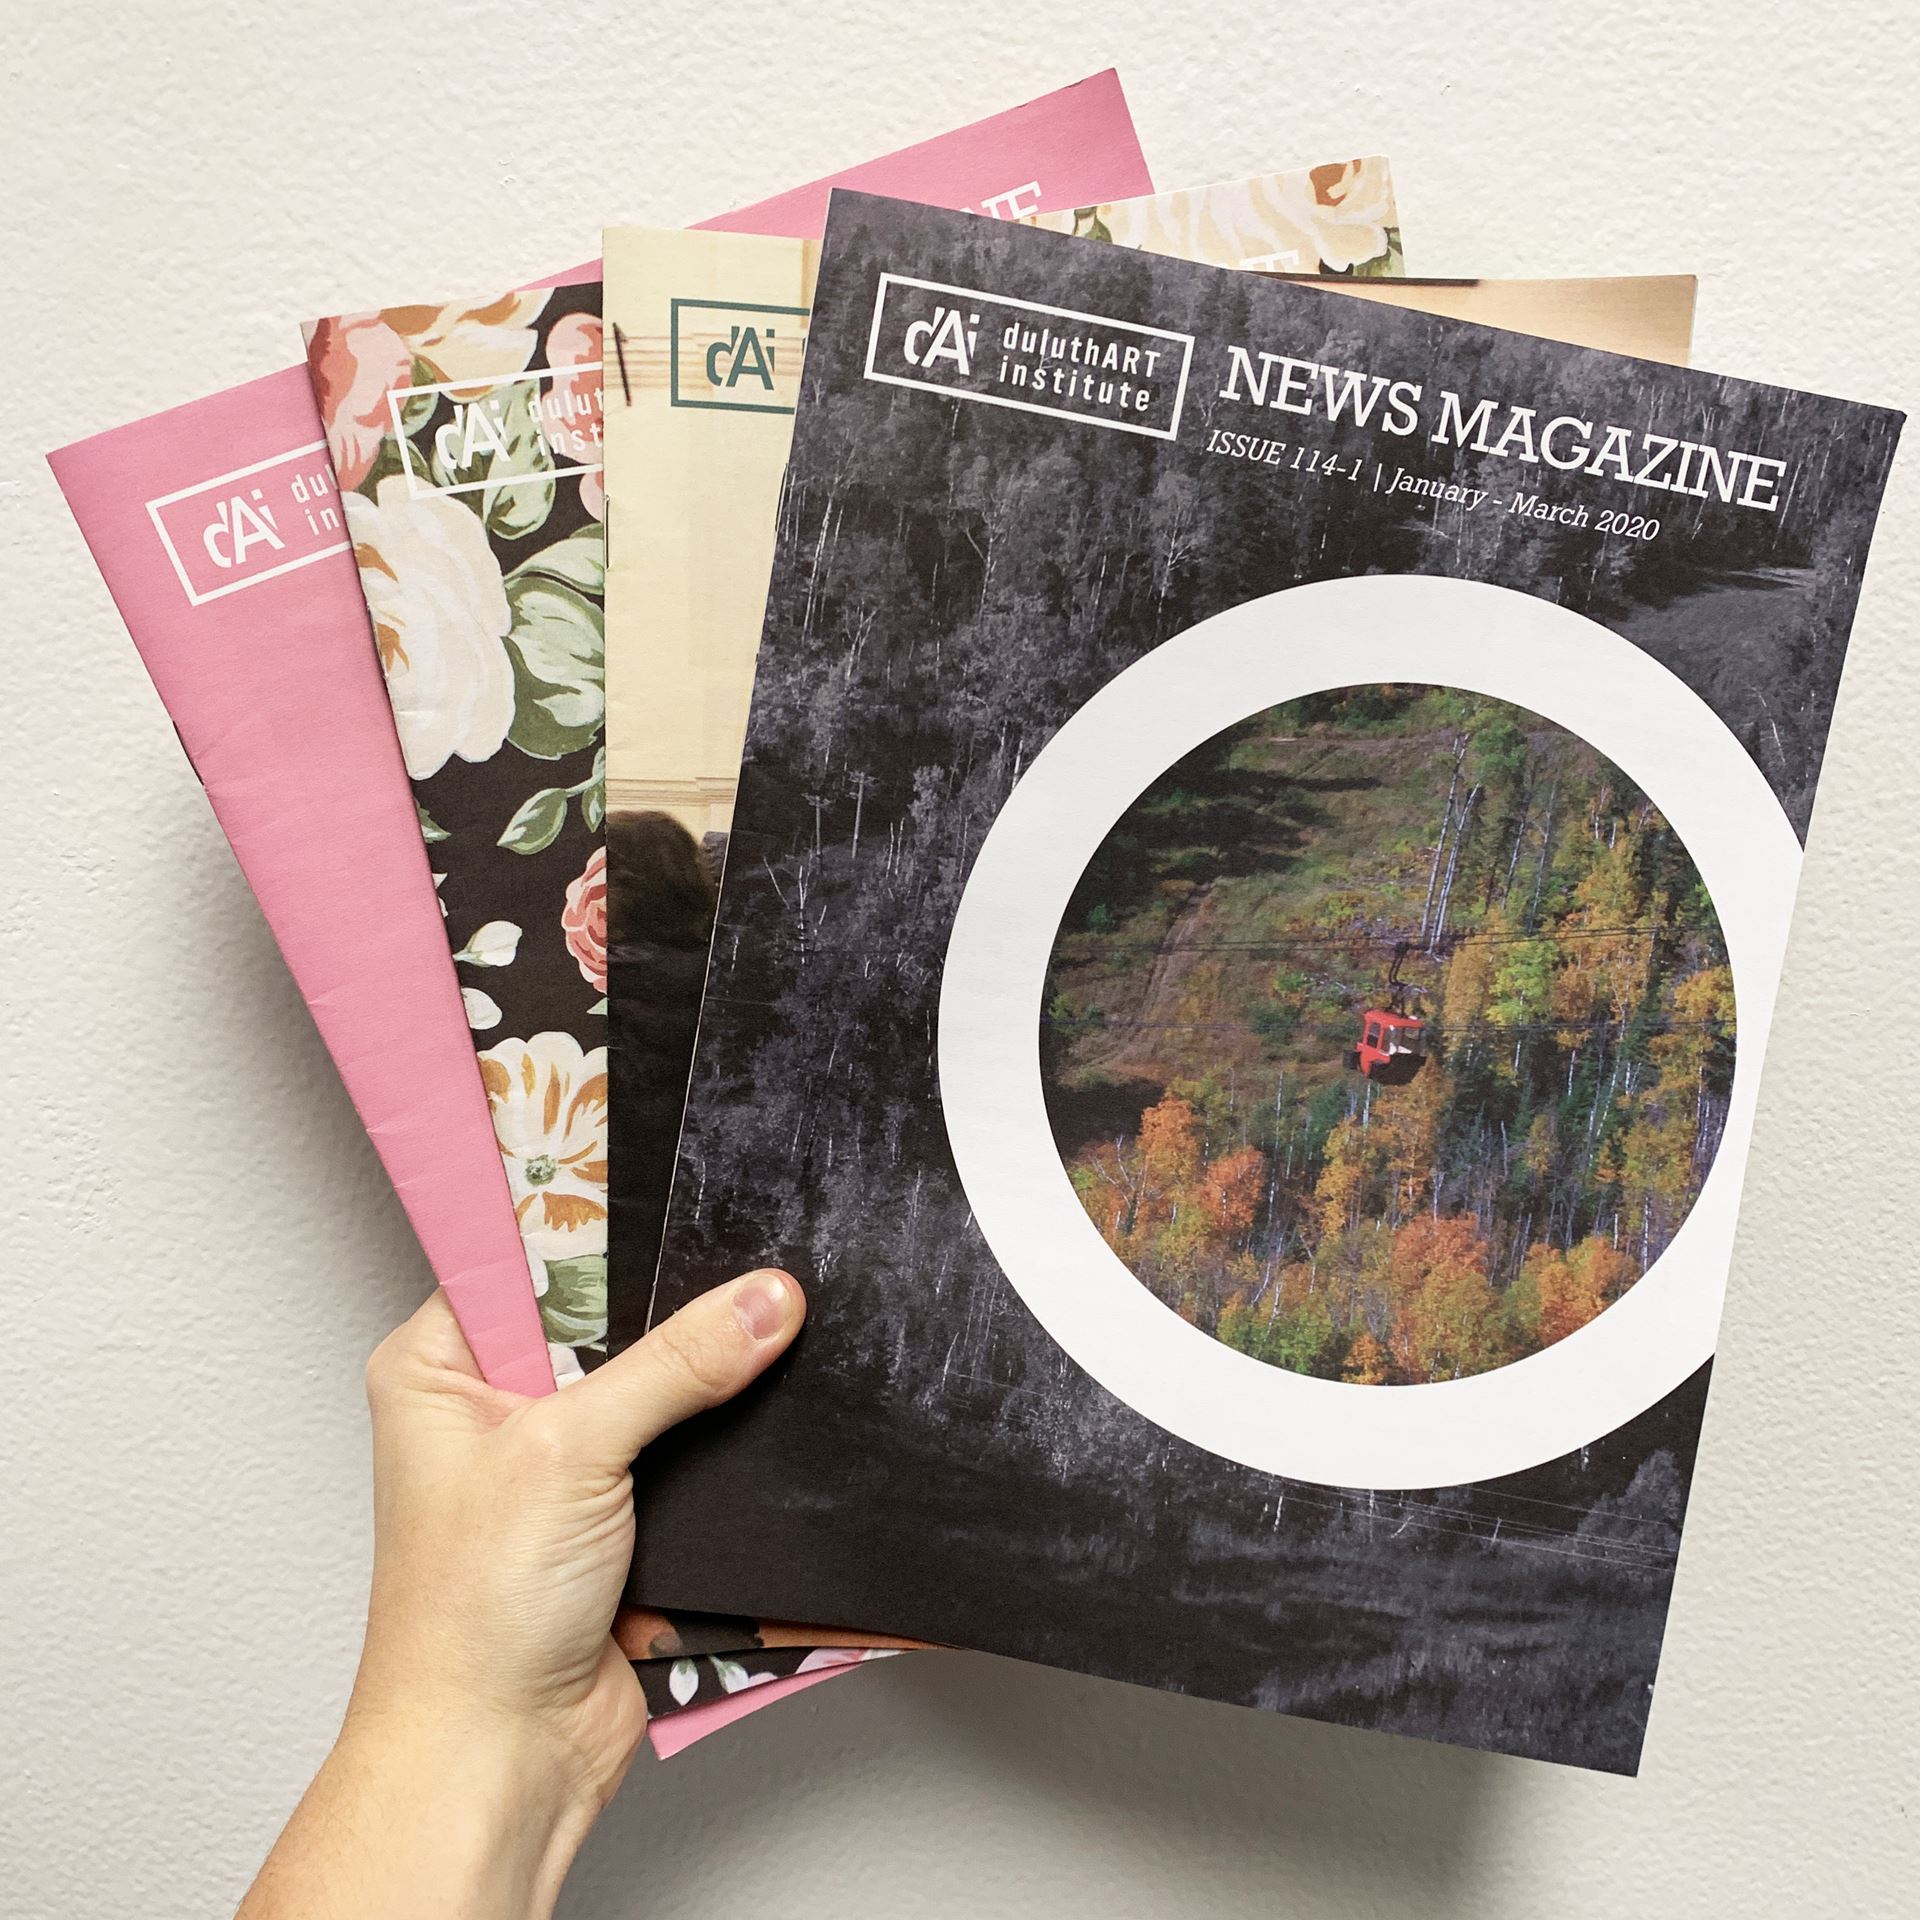 4 past editions of the DAI News Magazine